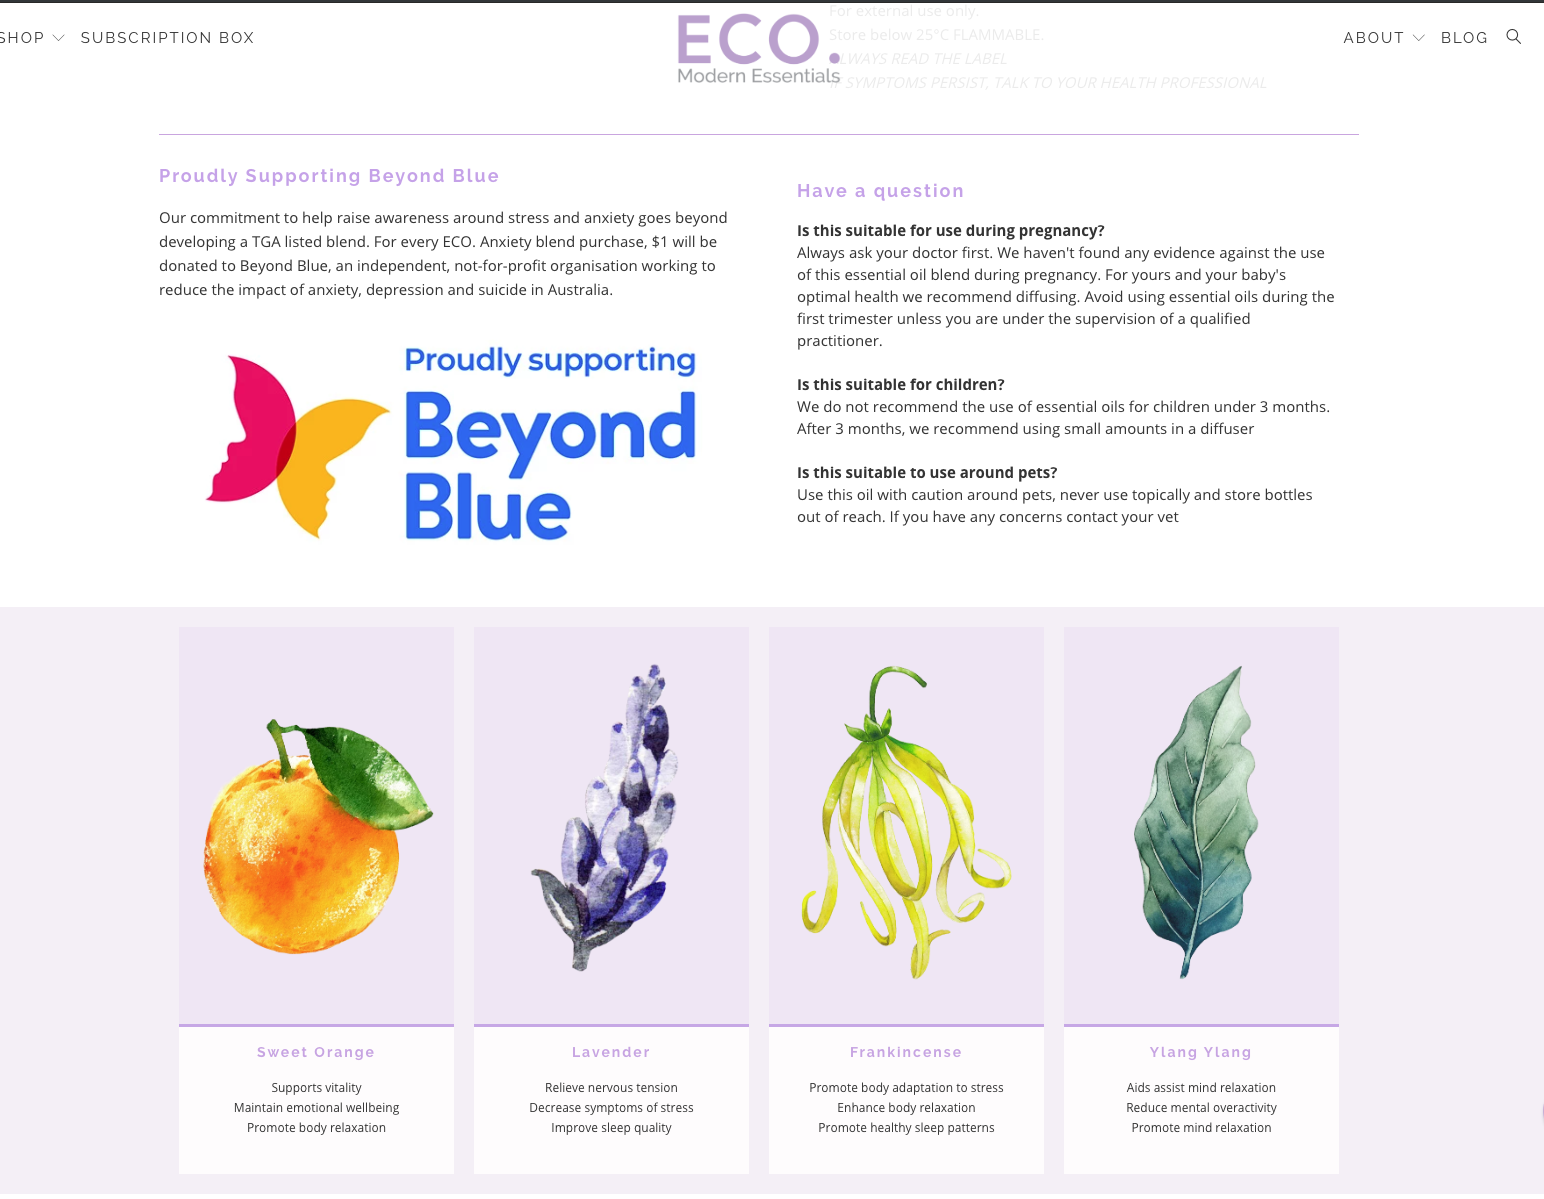 ECO Mordern Essentials - Proudly Supporting Beyond Blue